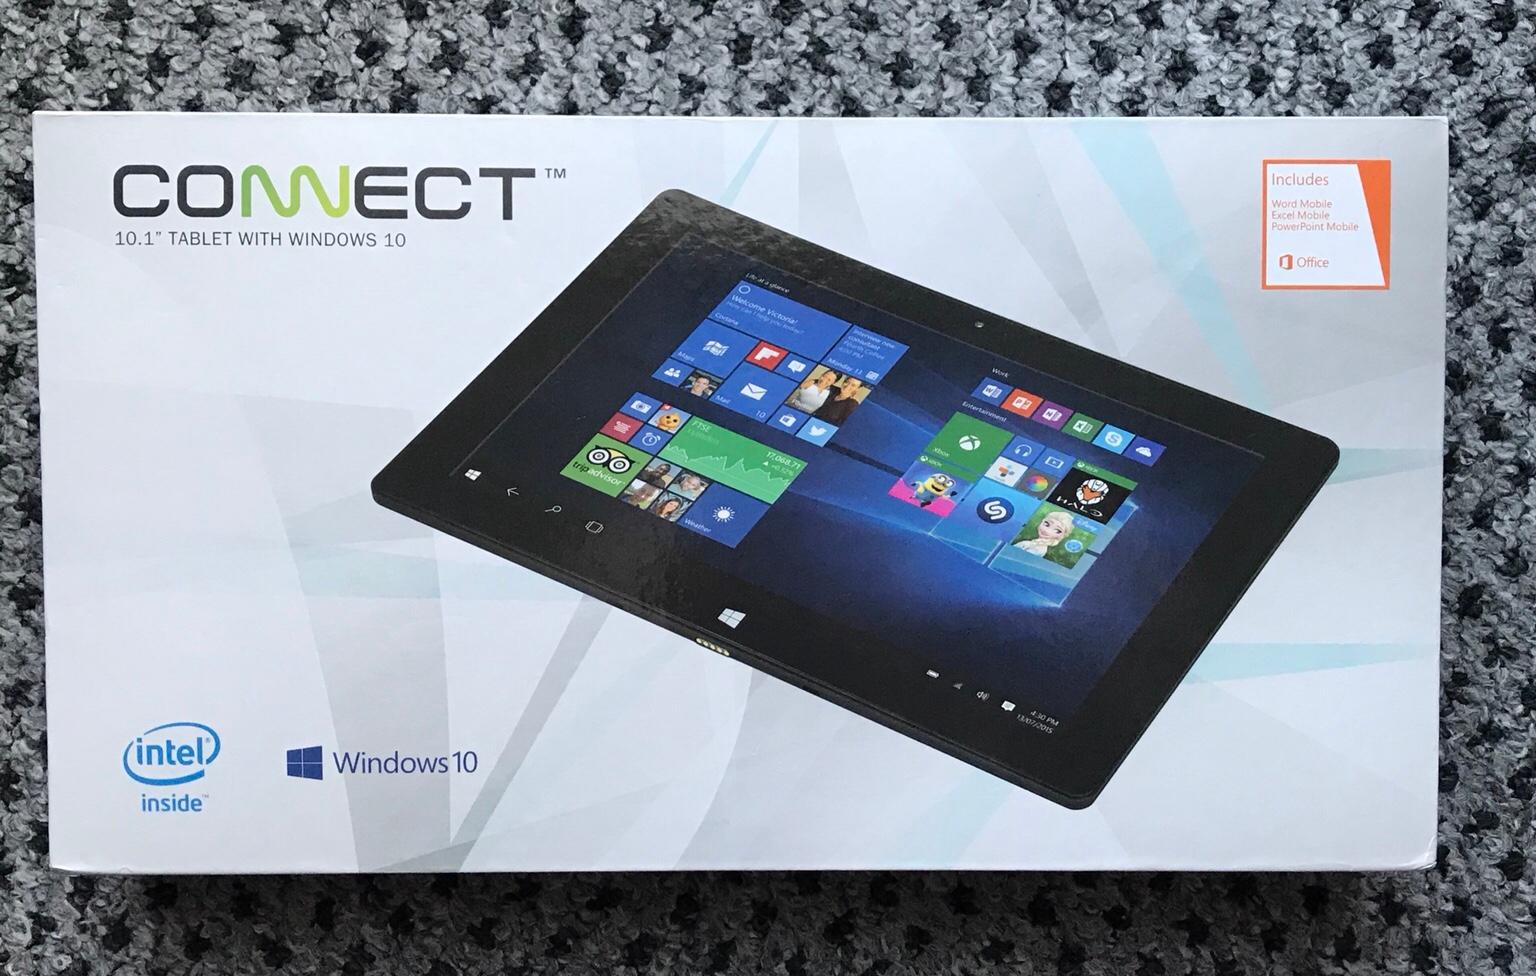 Windows Connect 10.1 inch tablet Boxed in DA1 London for £50.00 for